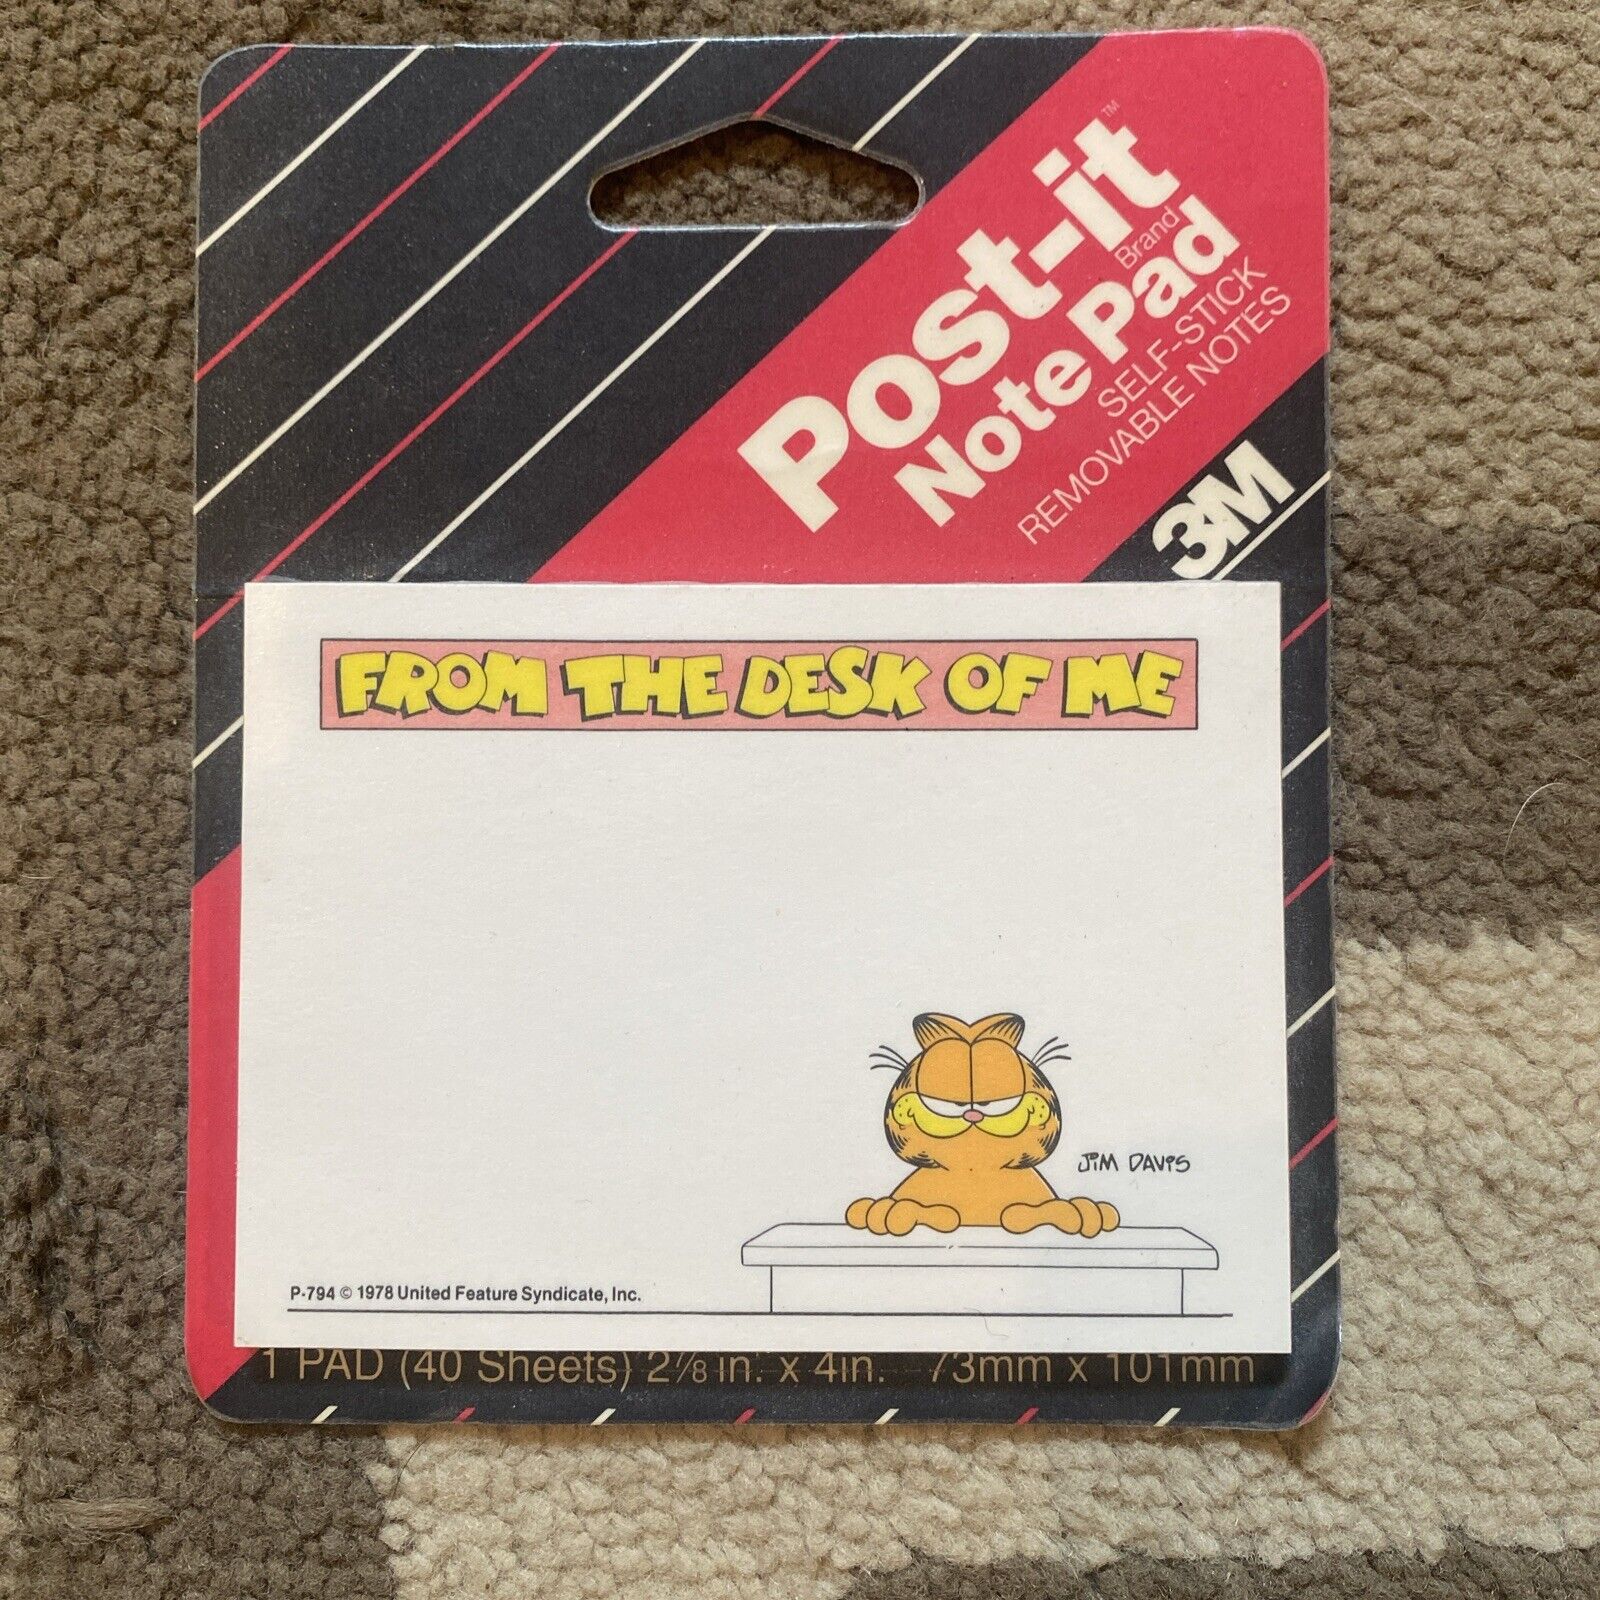 Vintage 1990 Garfield Post-It Note Pad “From The Desk Of Me” NEW IN PACKAGE